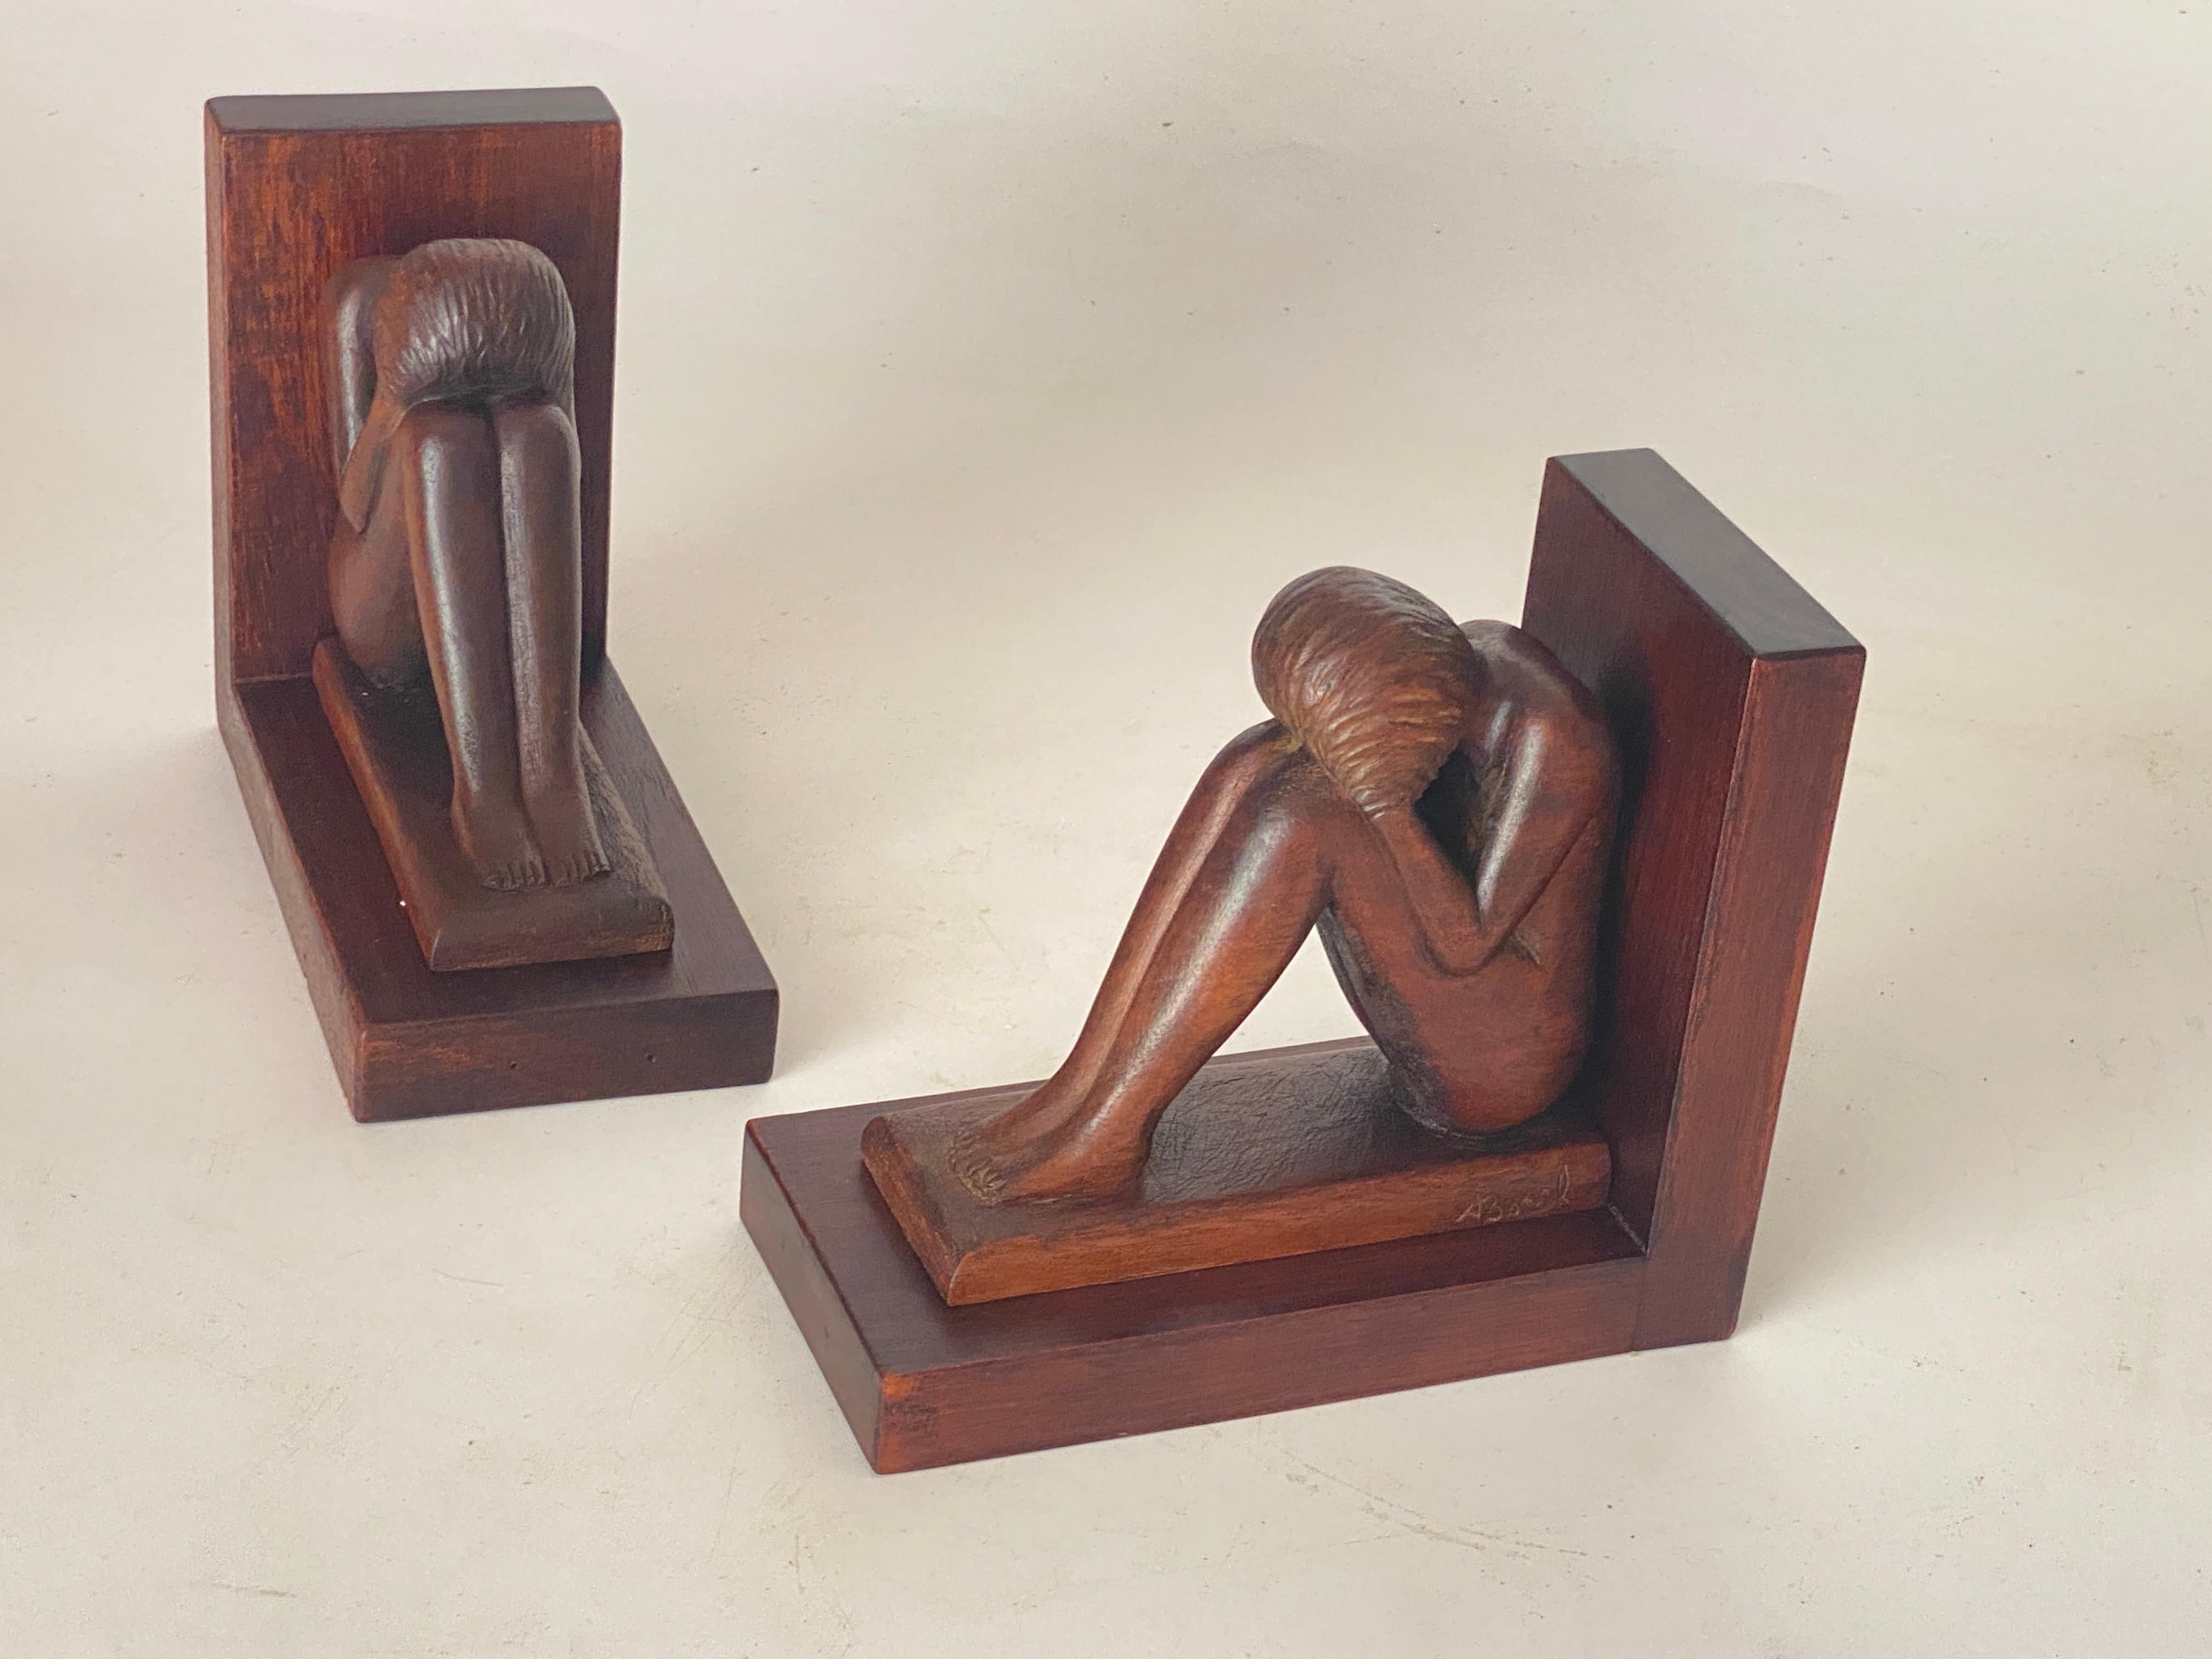 Pair of Art Deco Birds Book ends, Wood, Brown France, 1940 For Sale 1